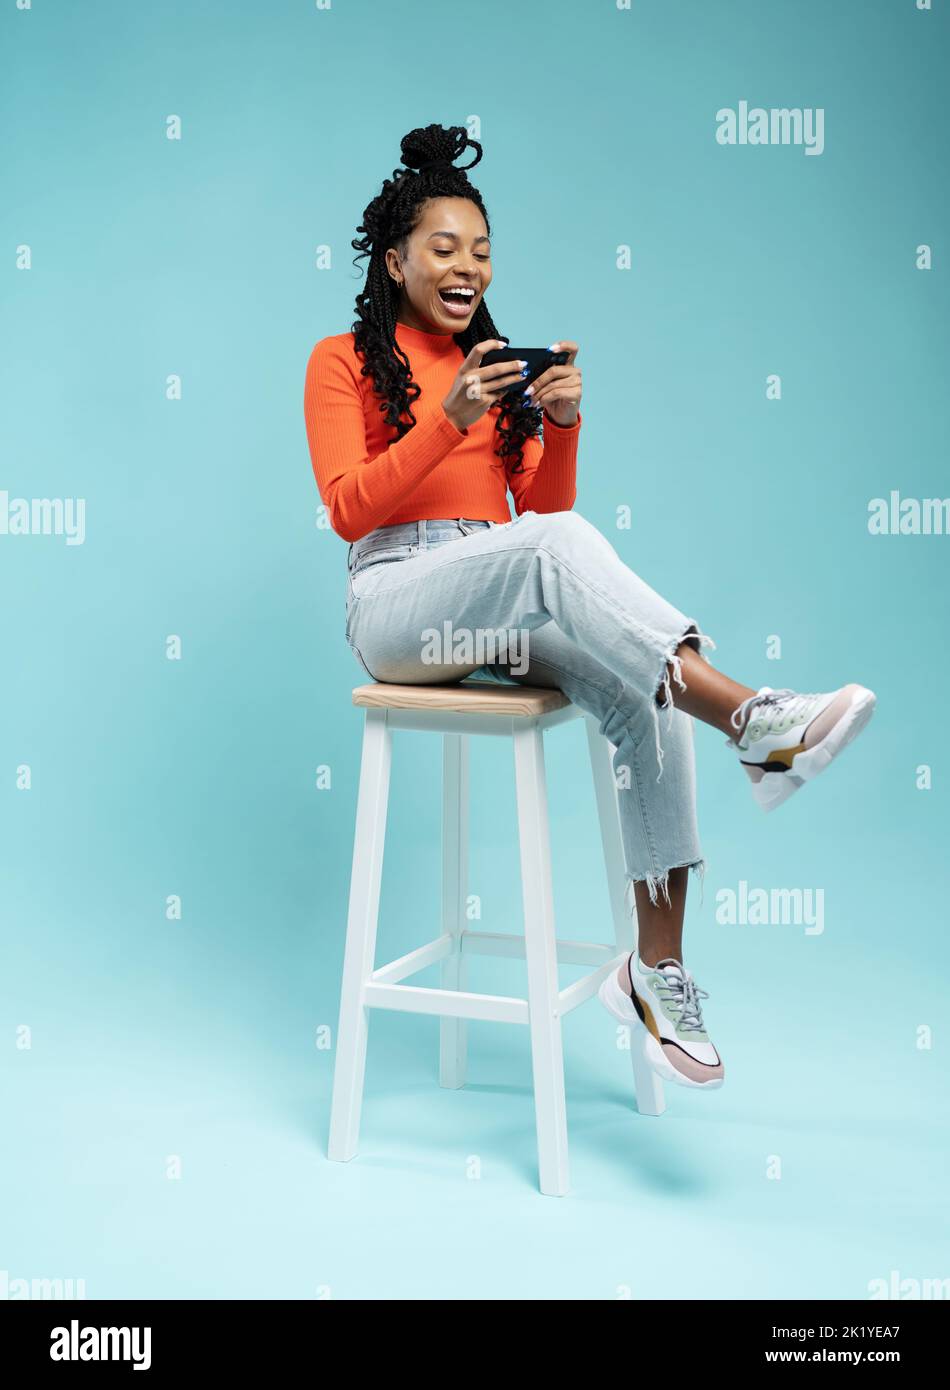 Portrait of an excited young woman sitting on a stool and playing games on mobile phone isolated over blue background Stock Photo